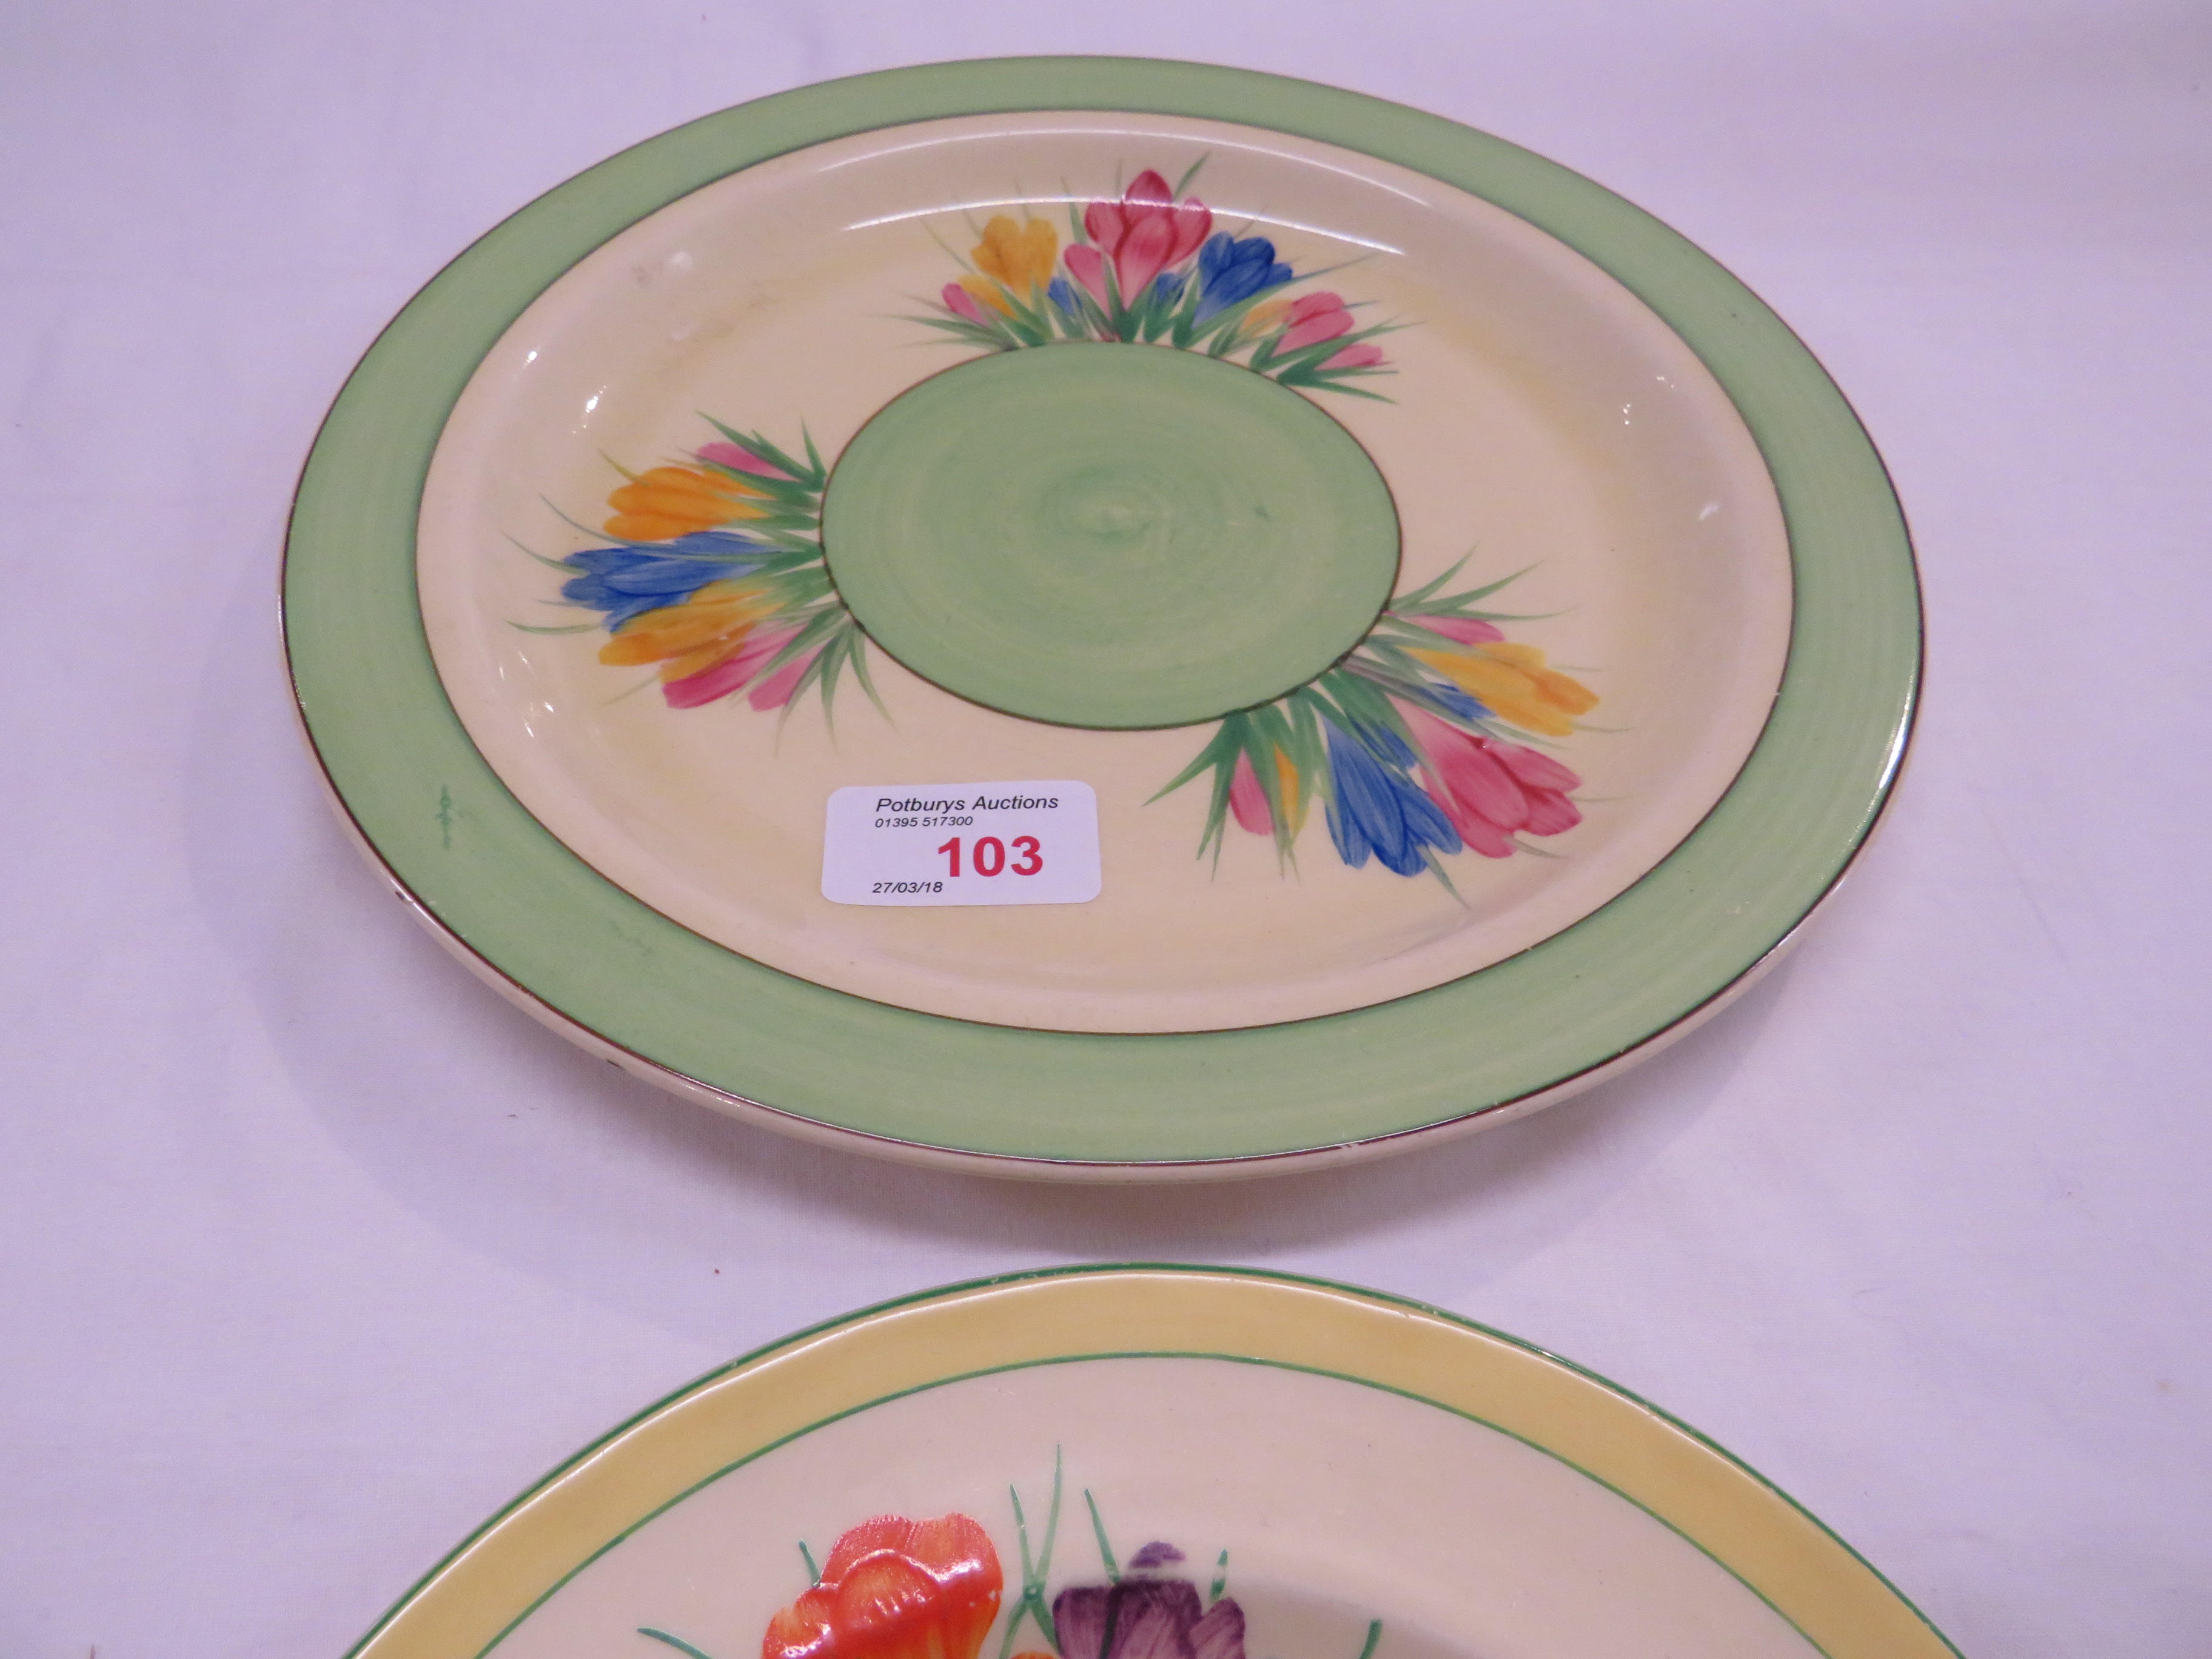 Clarice Cliff crocus pattern ware - Newport pottery plate and pepper pot, Royal Staffordshire tea - Image 2 of 4